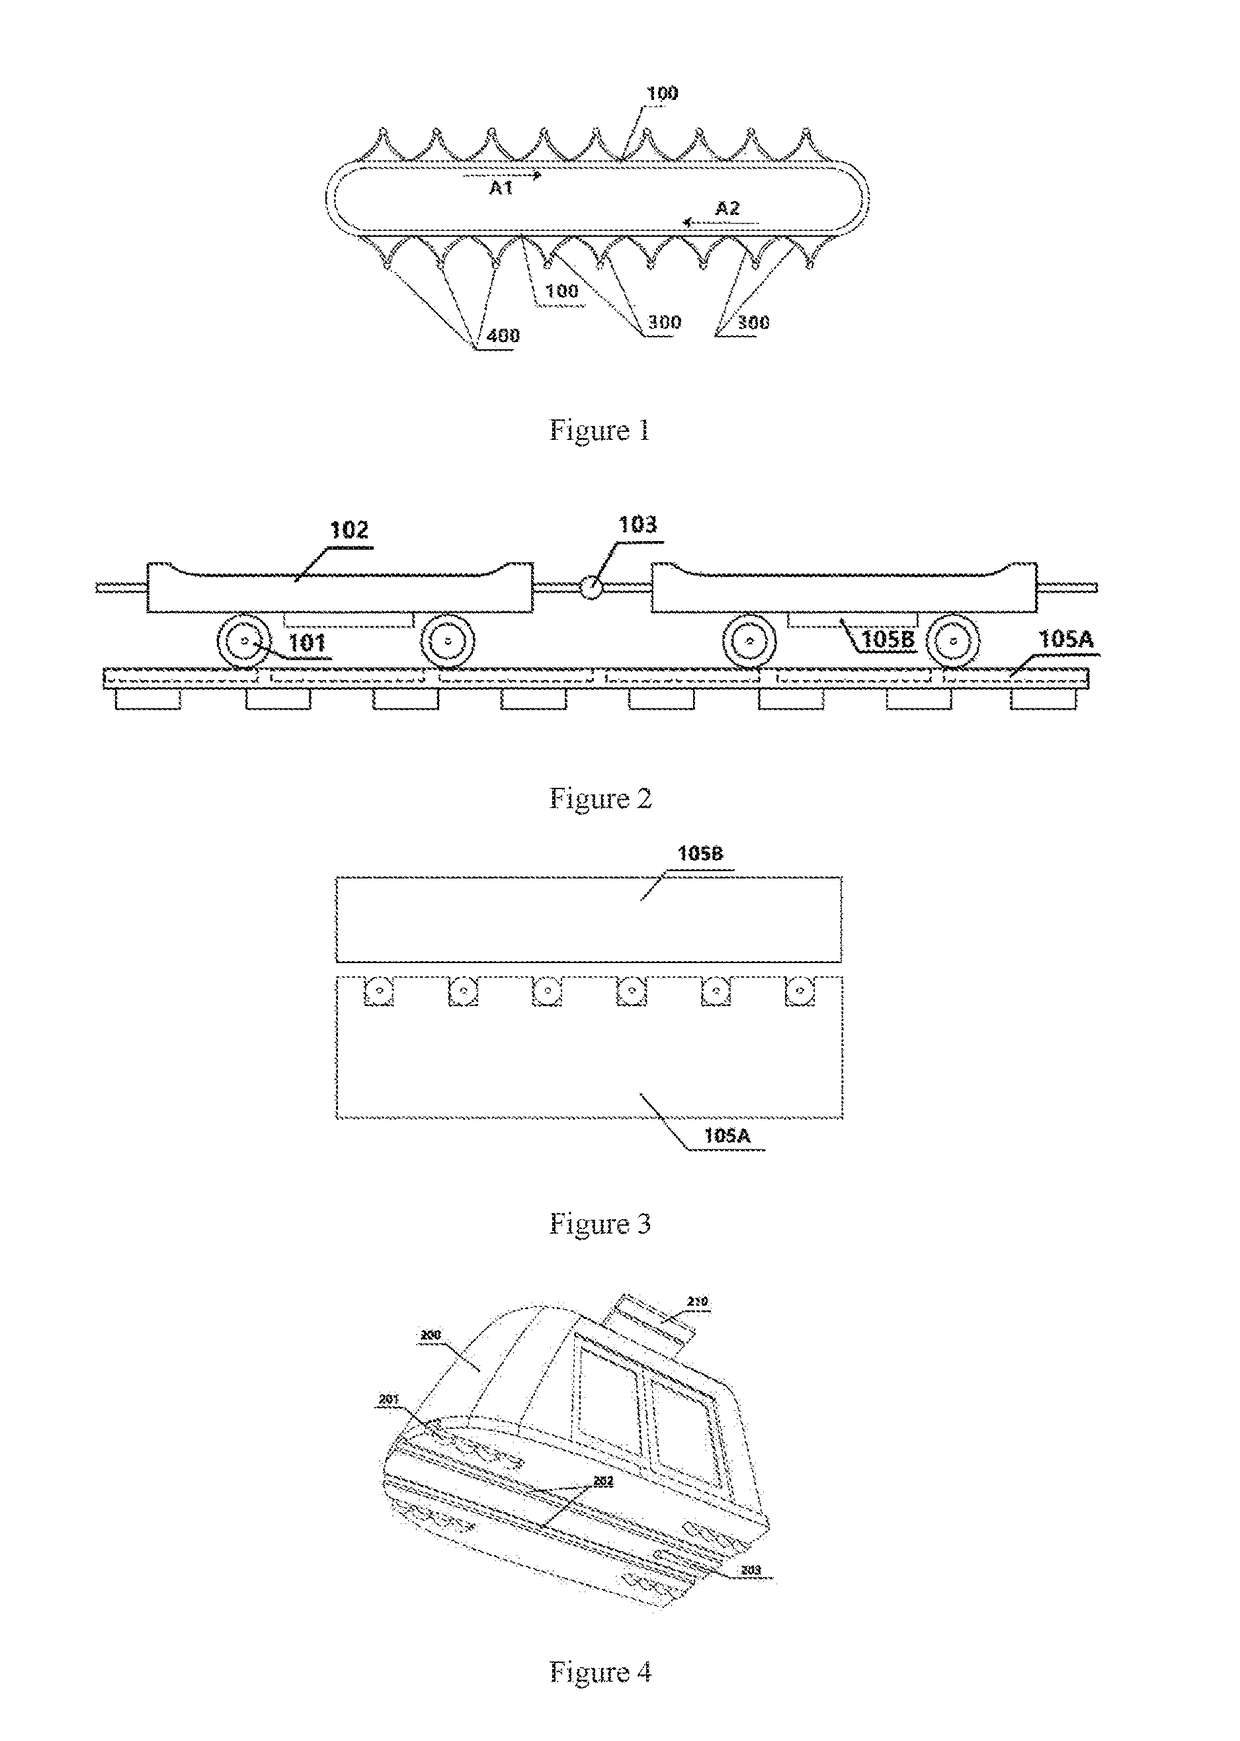 High-carrying-capacity non-stop rail transit system